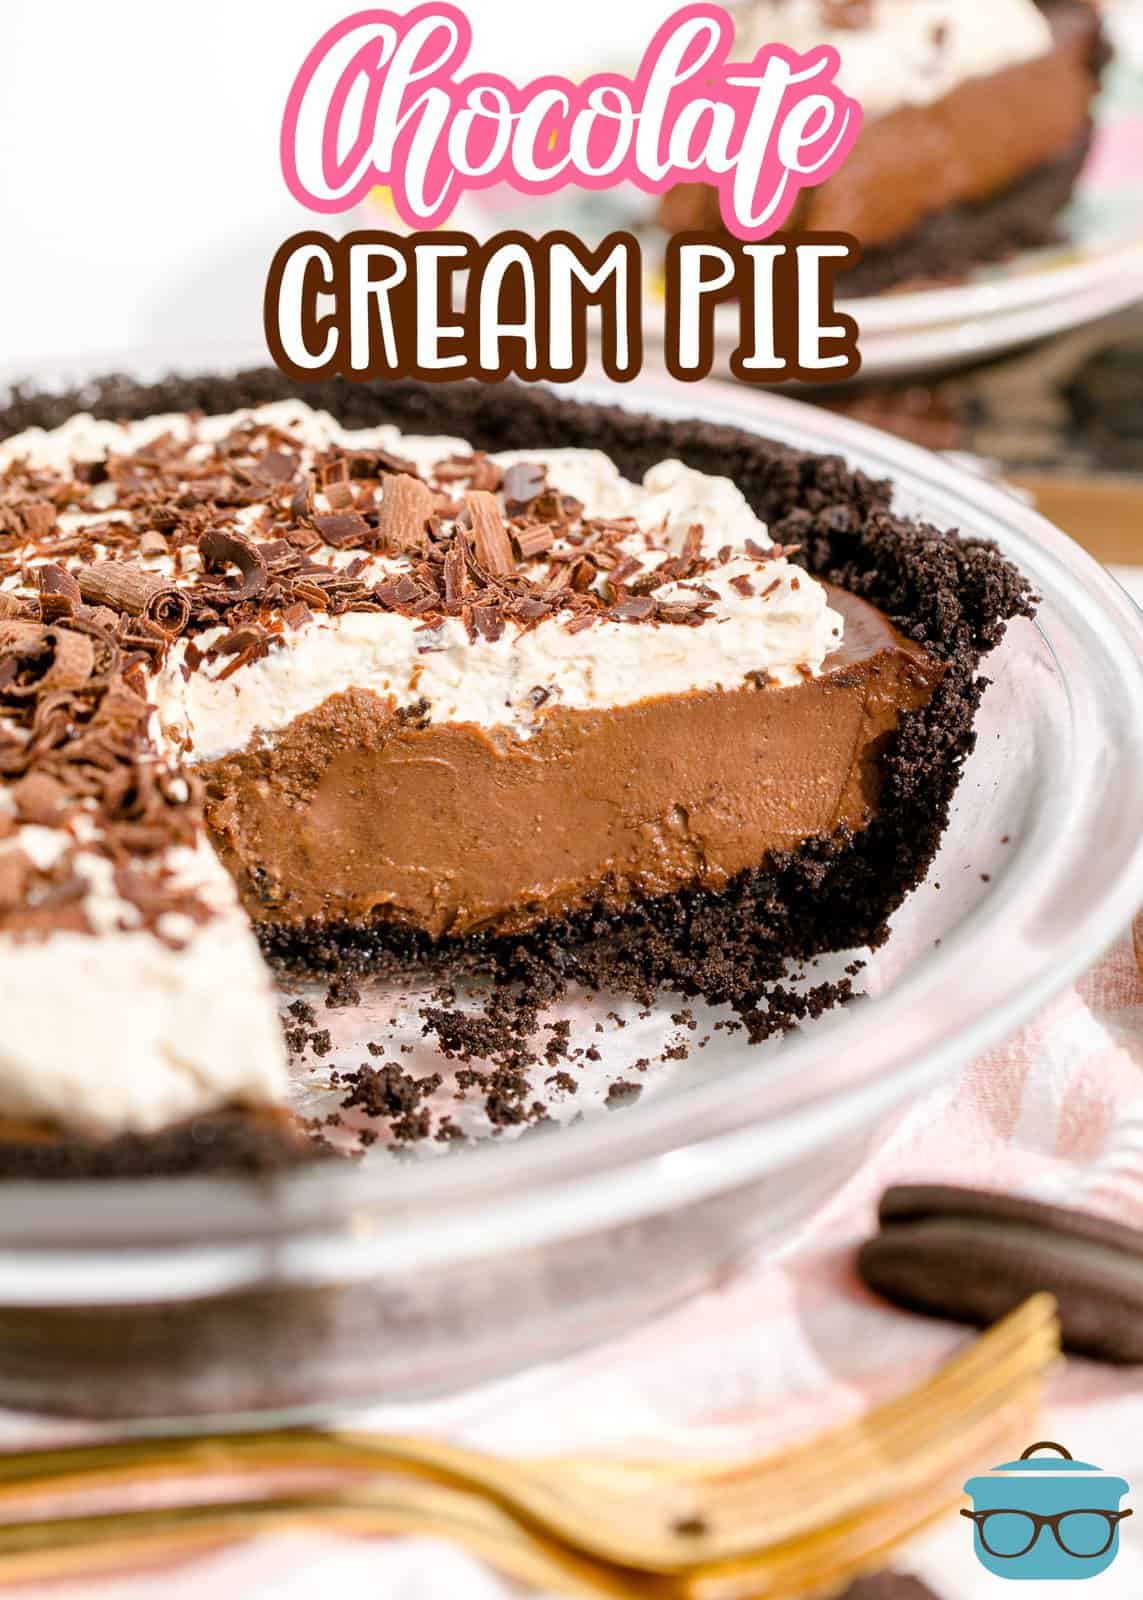 Pinterest image of finished Chocolate Cream Pie with slices removed.